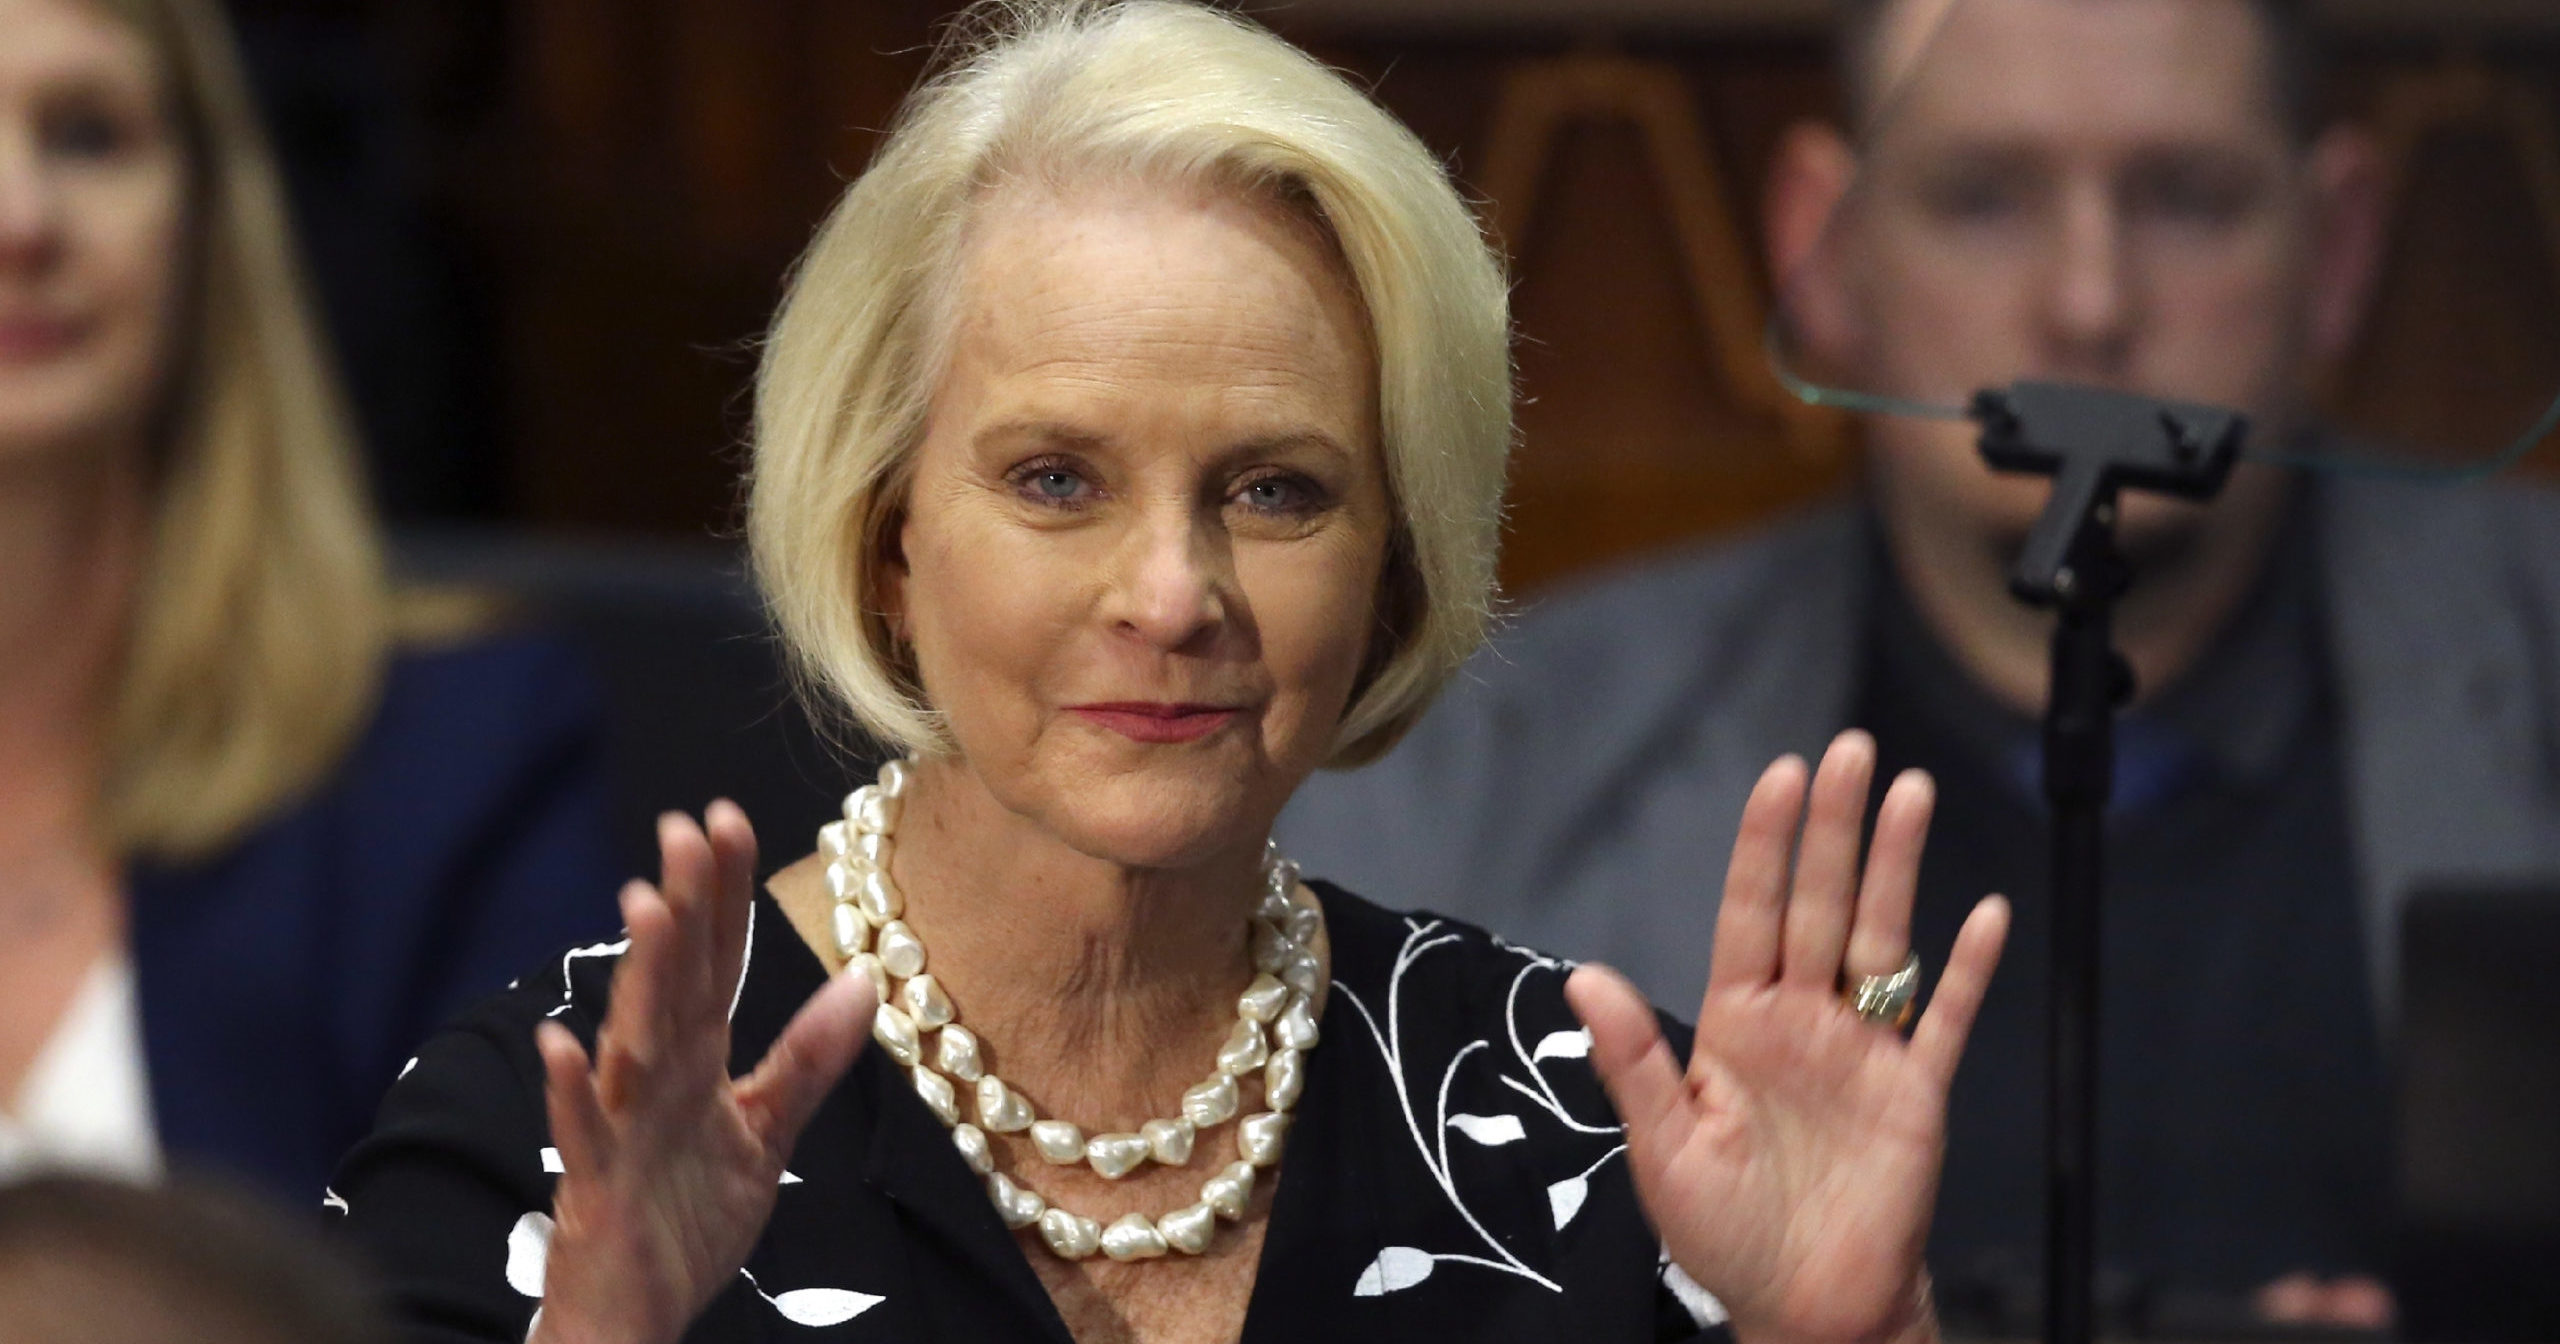 In this Jan. 13, 2020, file photo, Cindy McCain, wife of former Arizona Sen. John McCain, waves to the crowd after being acknowledged by Arizona Republican Gov. Doug Ducey during his State of the State address on the opening day of the legislative session at the Capitol in Phoenix.